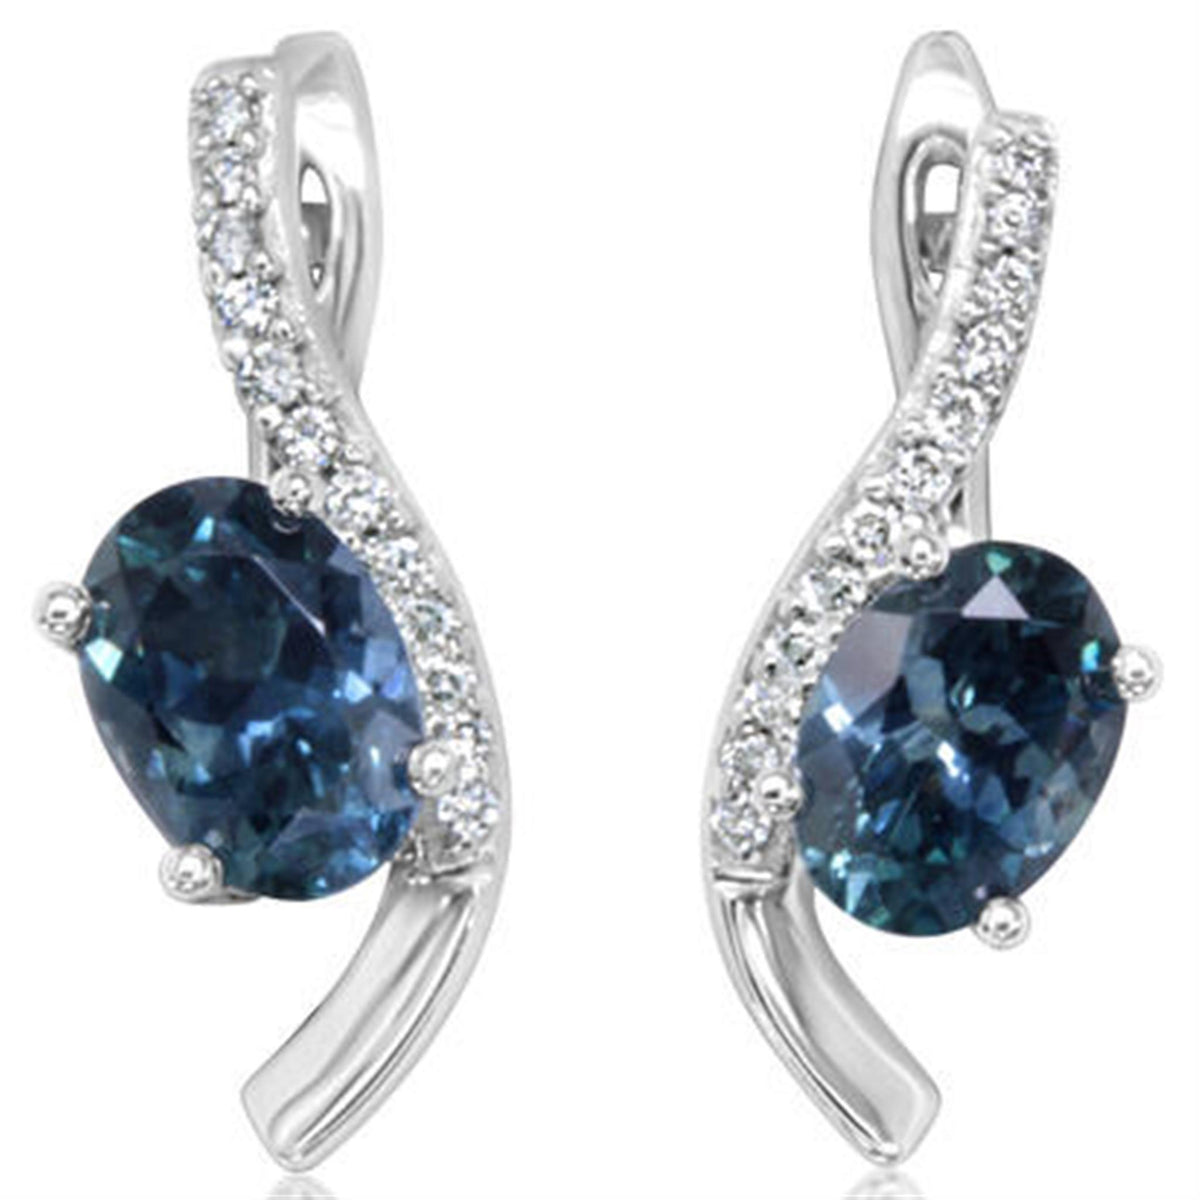 14Kt White Gold Leverback Earrings Gemstone Earrings With 2.10ct Sapphires